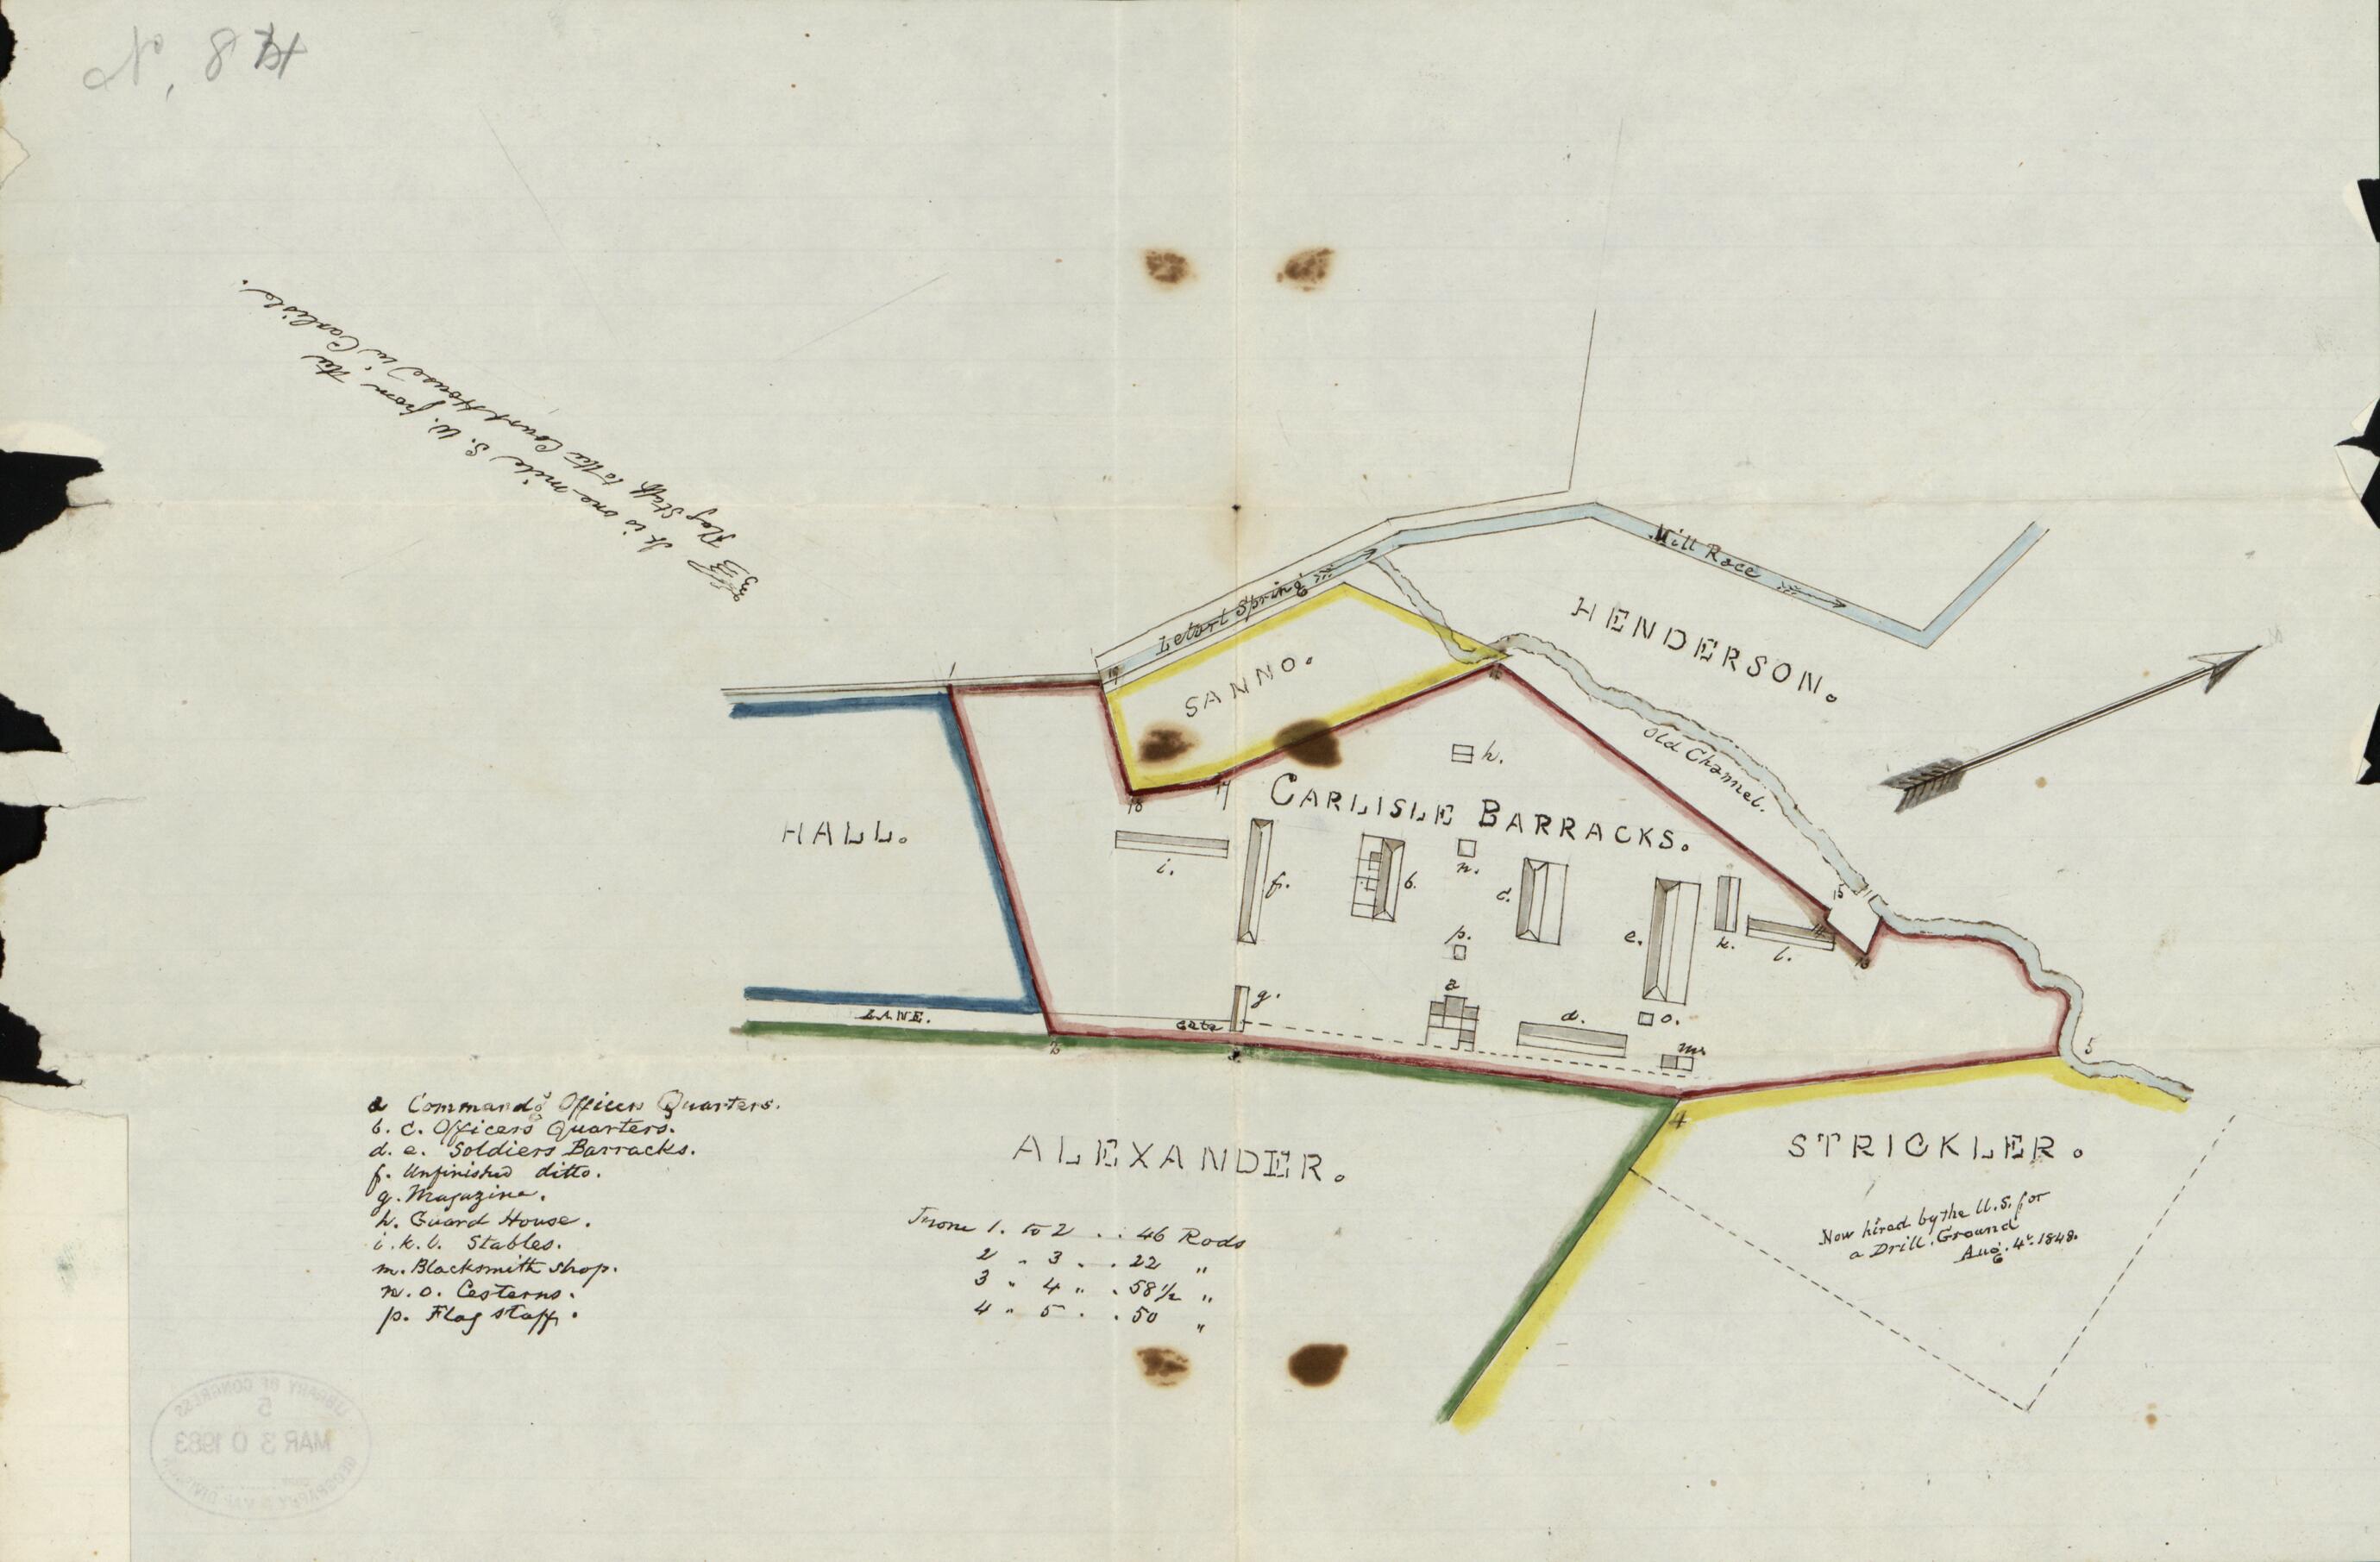 This old map of Map of the Carlisle Barracks, Carlisle, Pennsylvania from 1848 was created by O. M. (Orlando Metcalfe) Poe in 1848